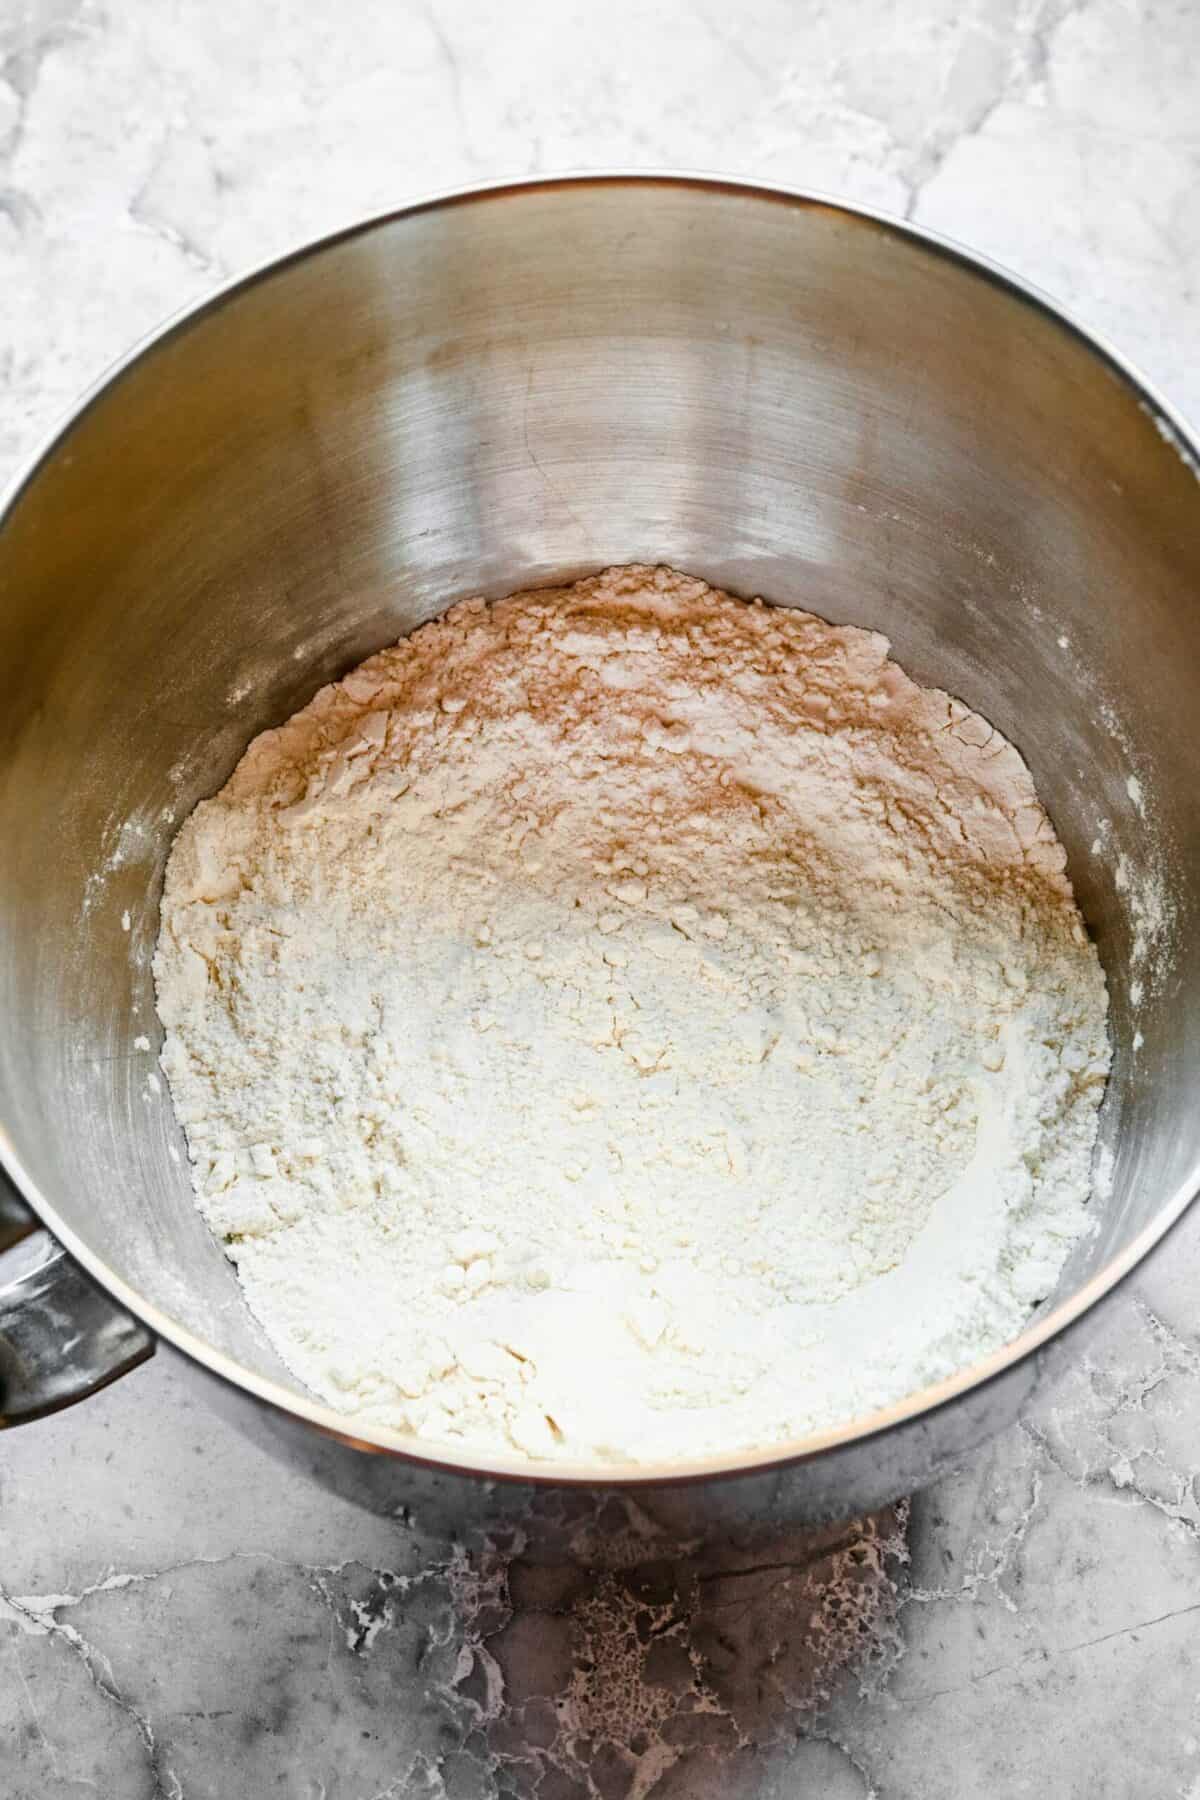 A stand mixer mixing bowl filled with a flour mixture